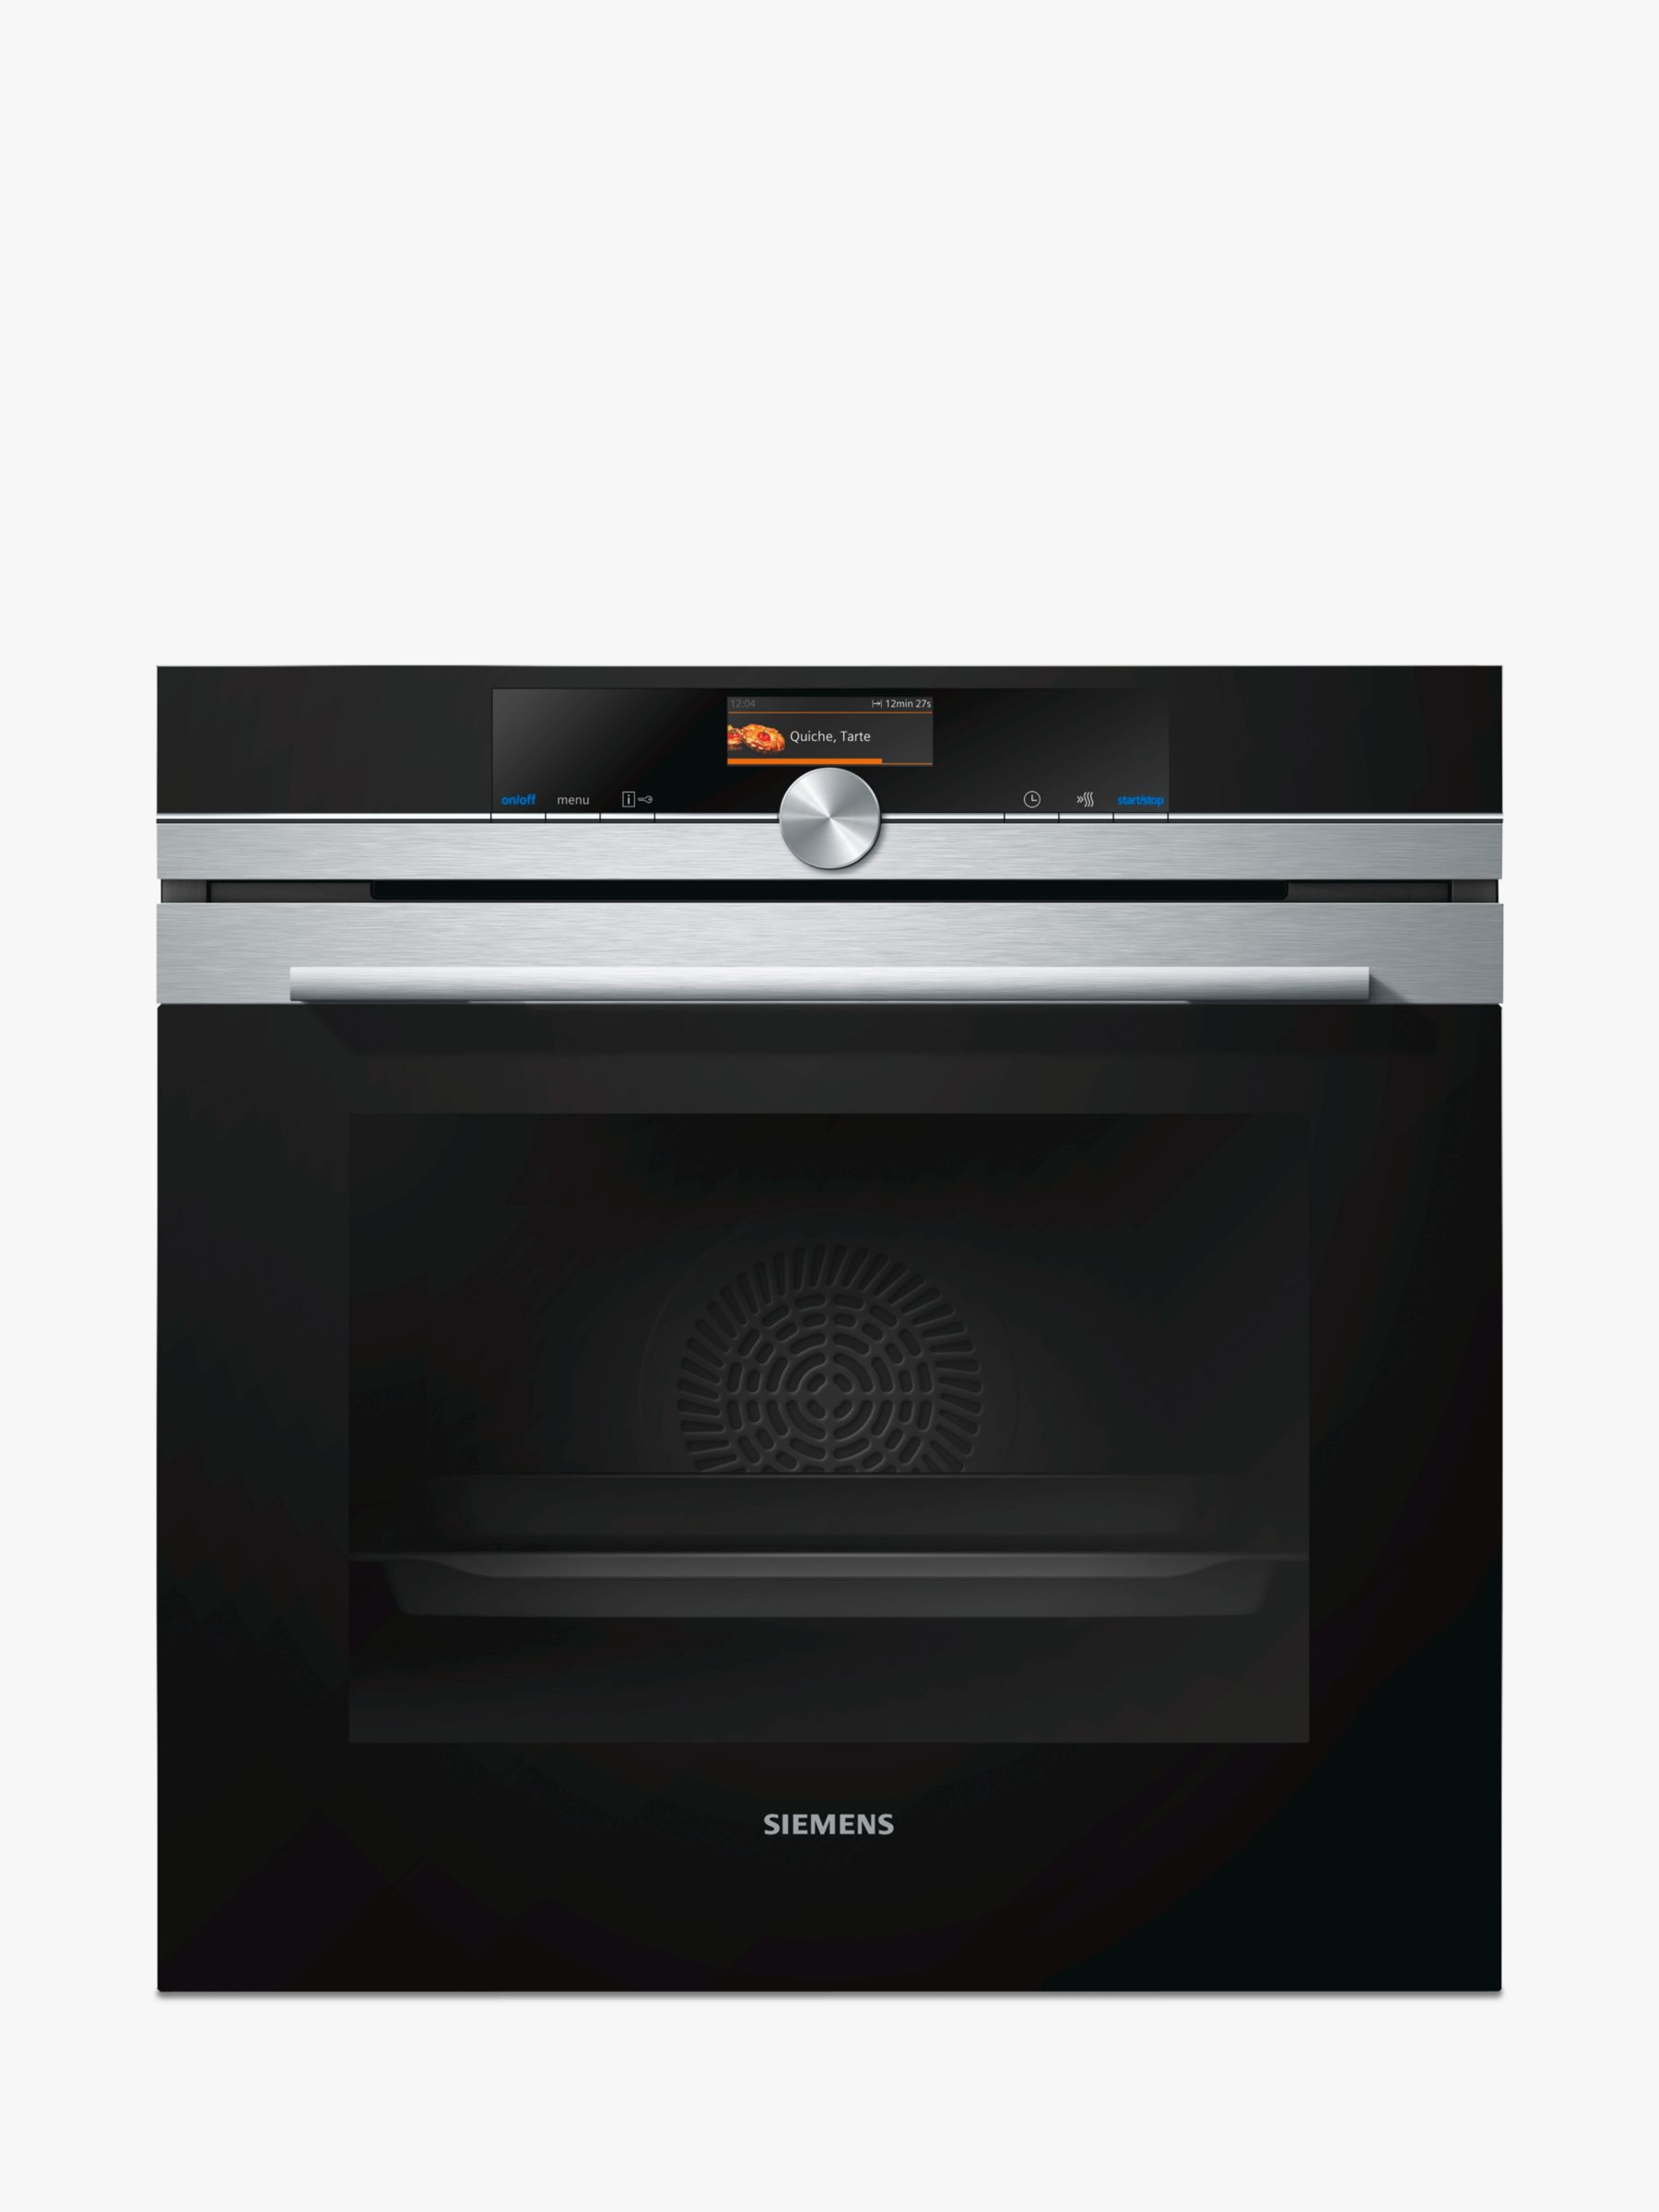 Siemens HB676GBS6B Built-In Oven with Home Connect, Black/Stainless Steel